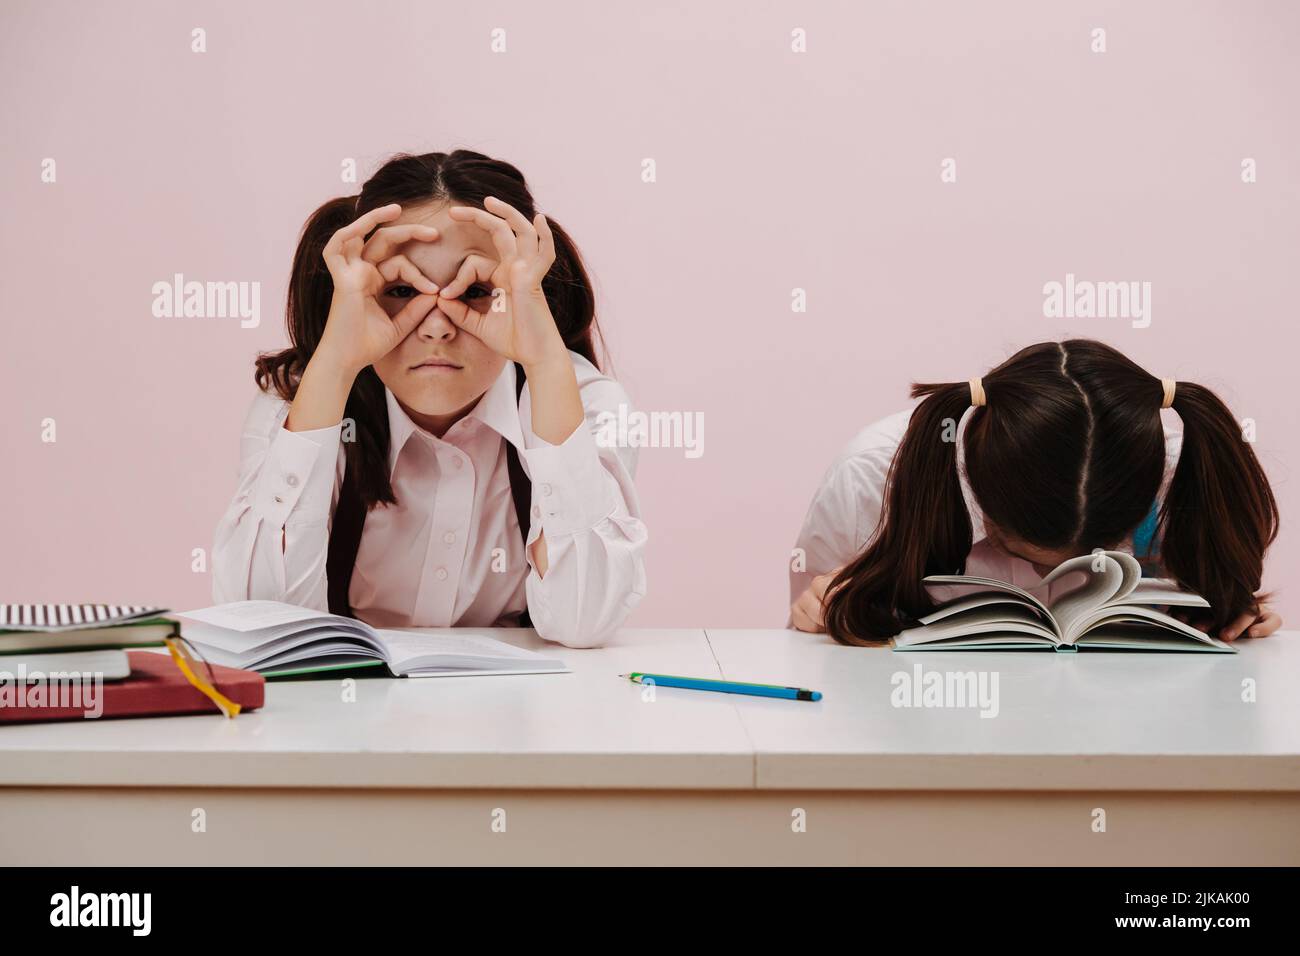 Studying dry dull subject. Schoolgirl twins, sitting behind the desk bored Stock Photo